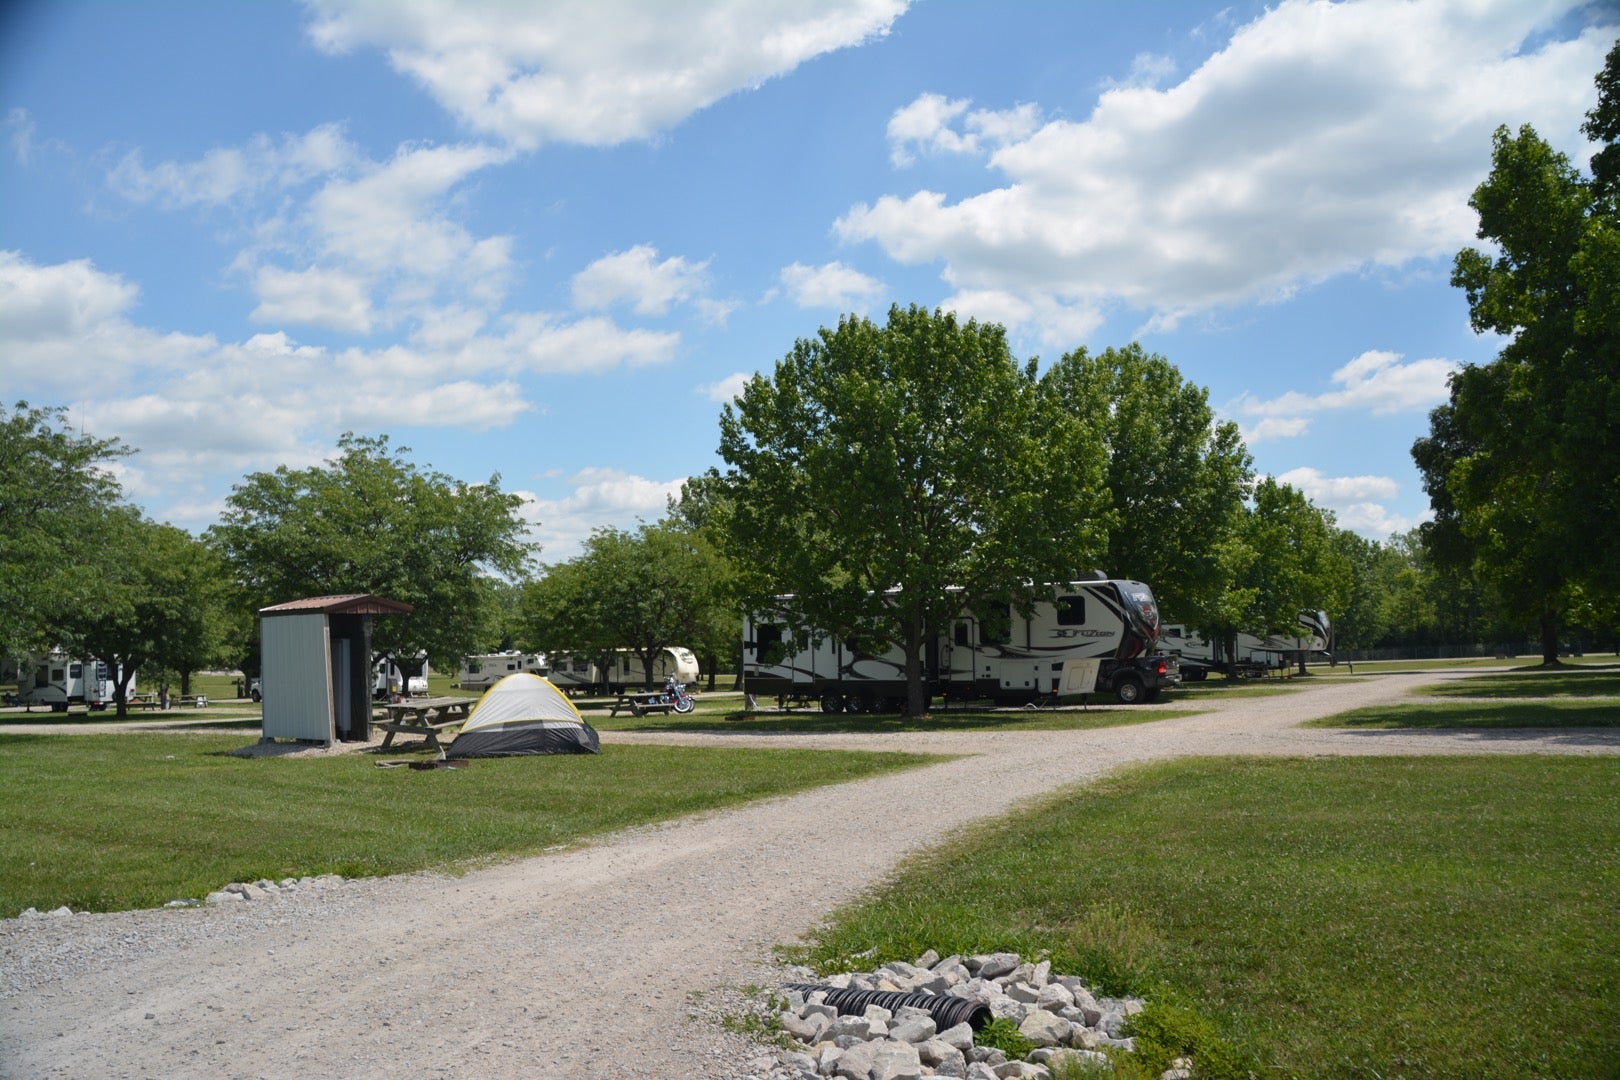 Camper submitted image from Johnson County Park - 3